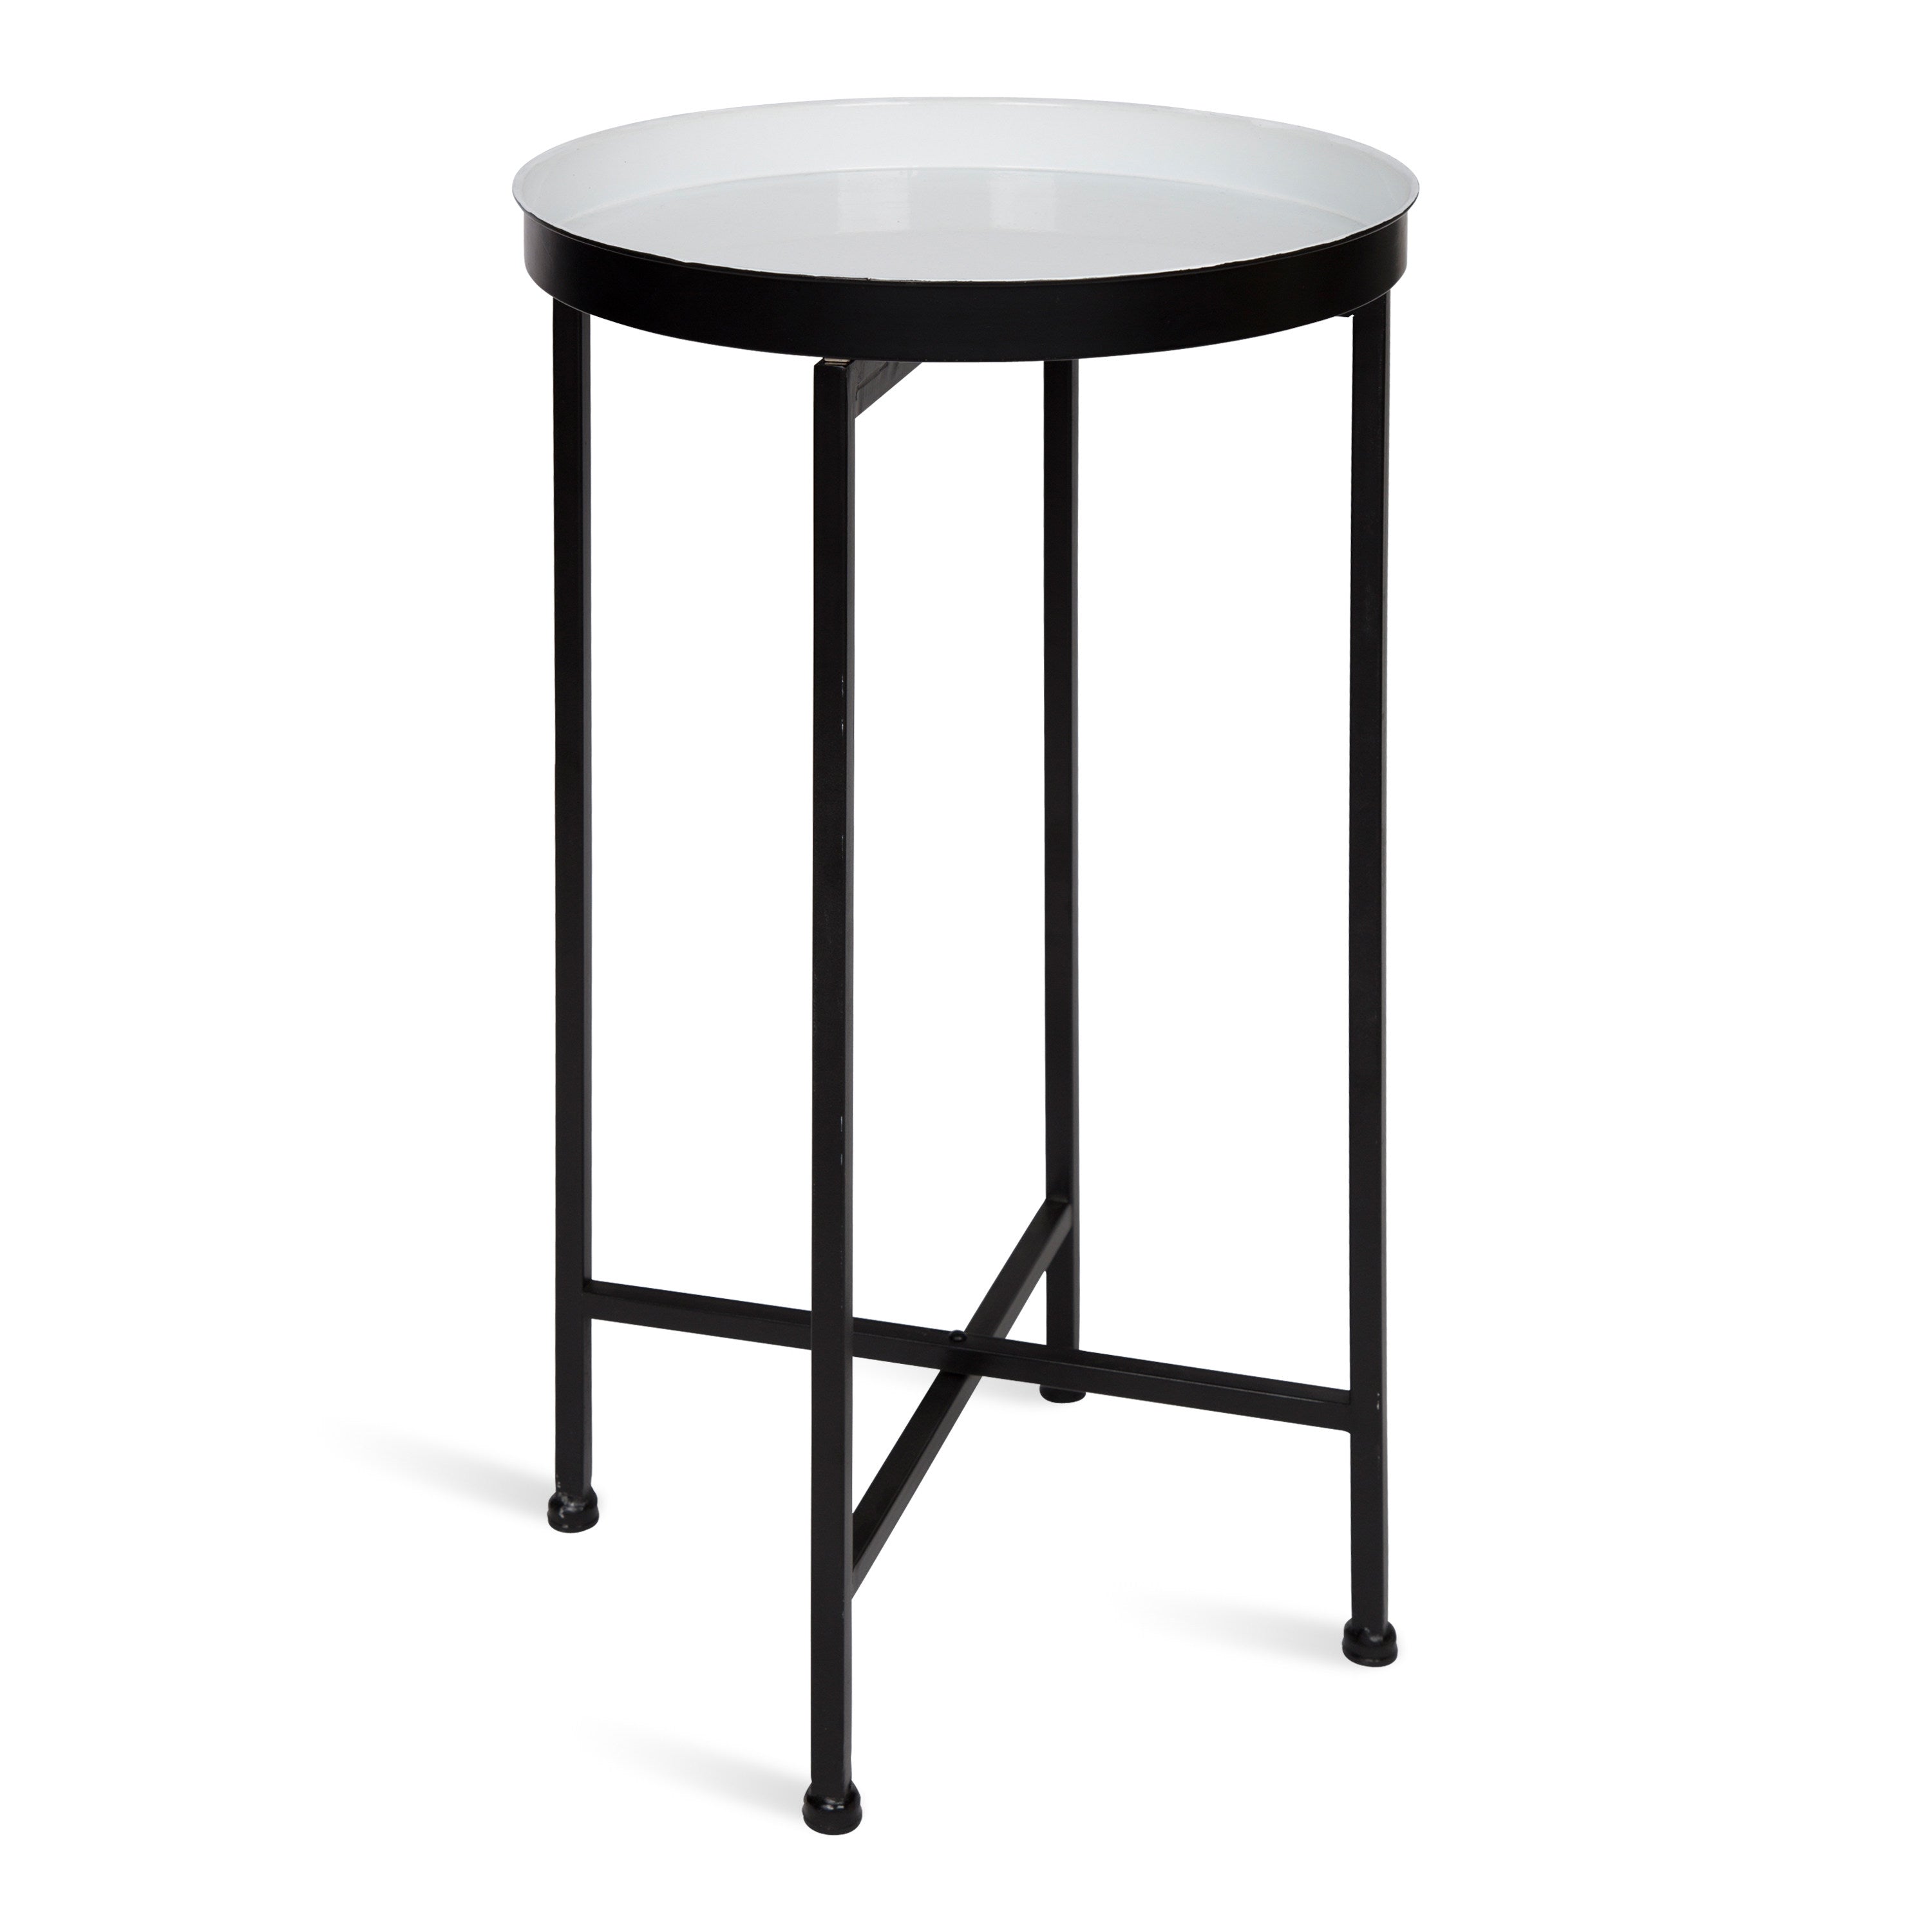 Celia Round Metal Foldable Tray Accent Table